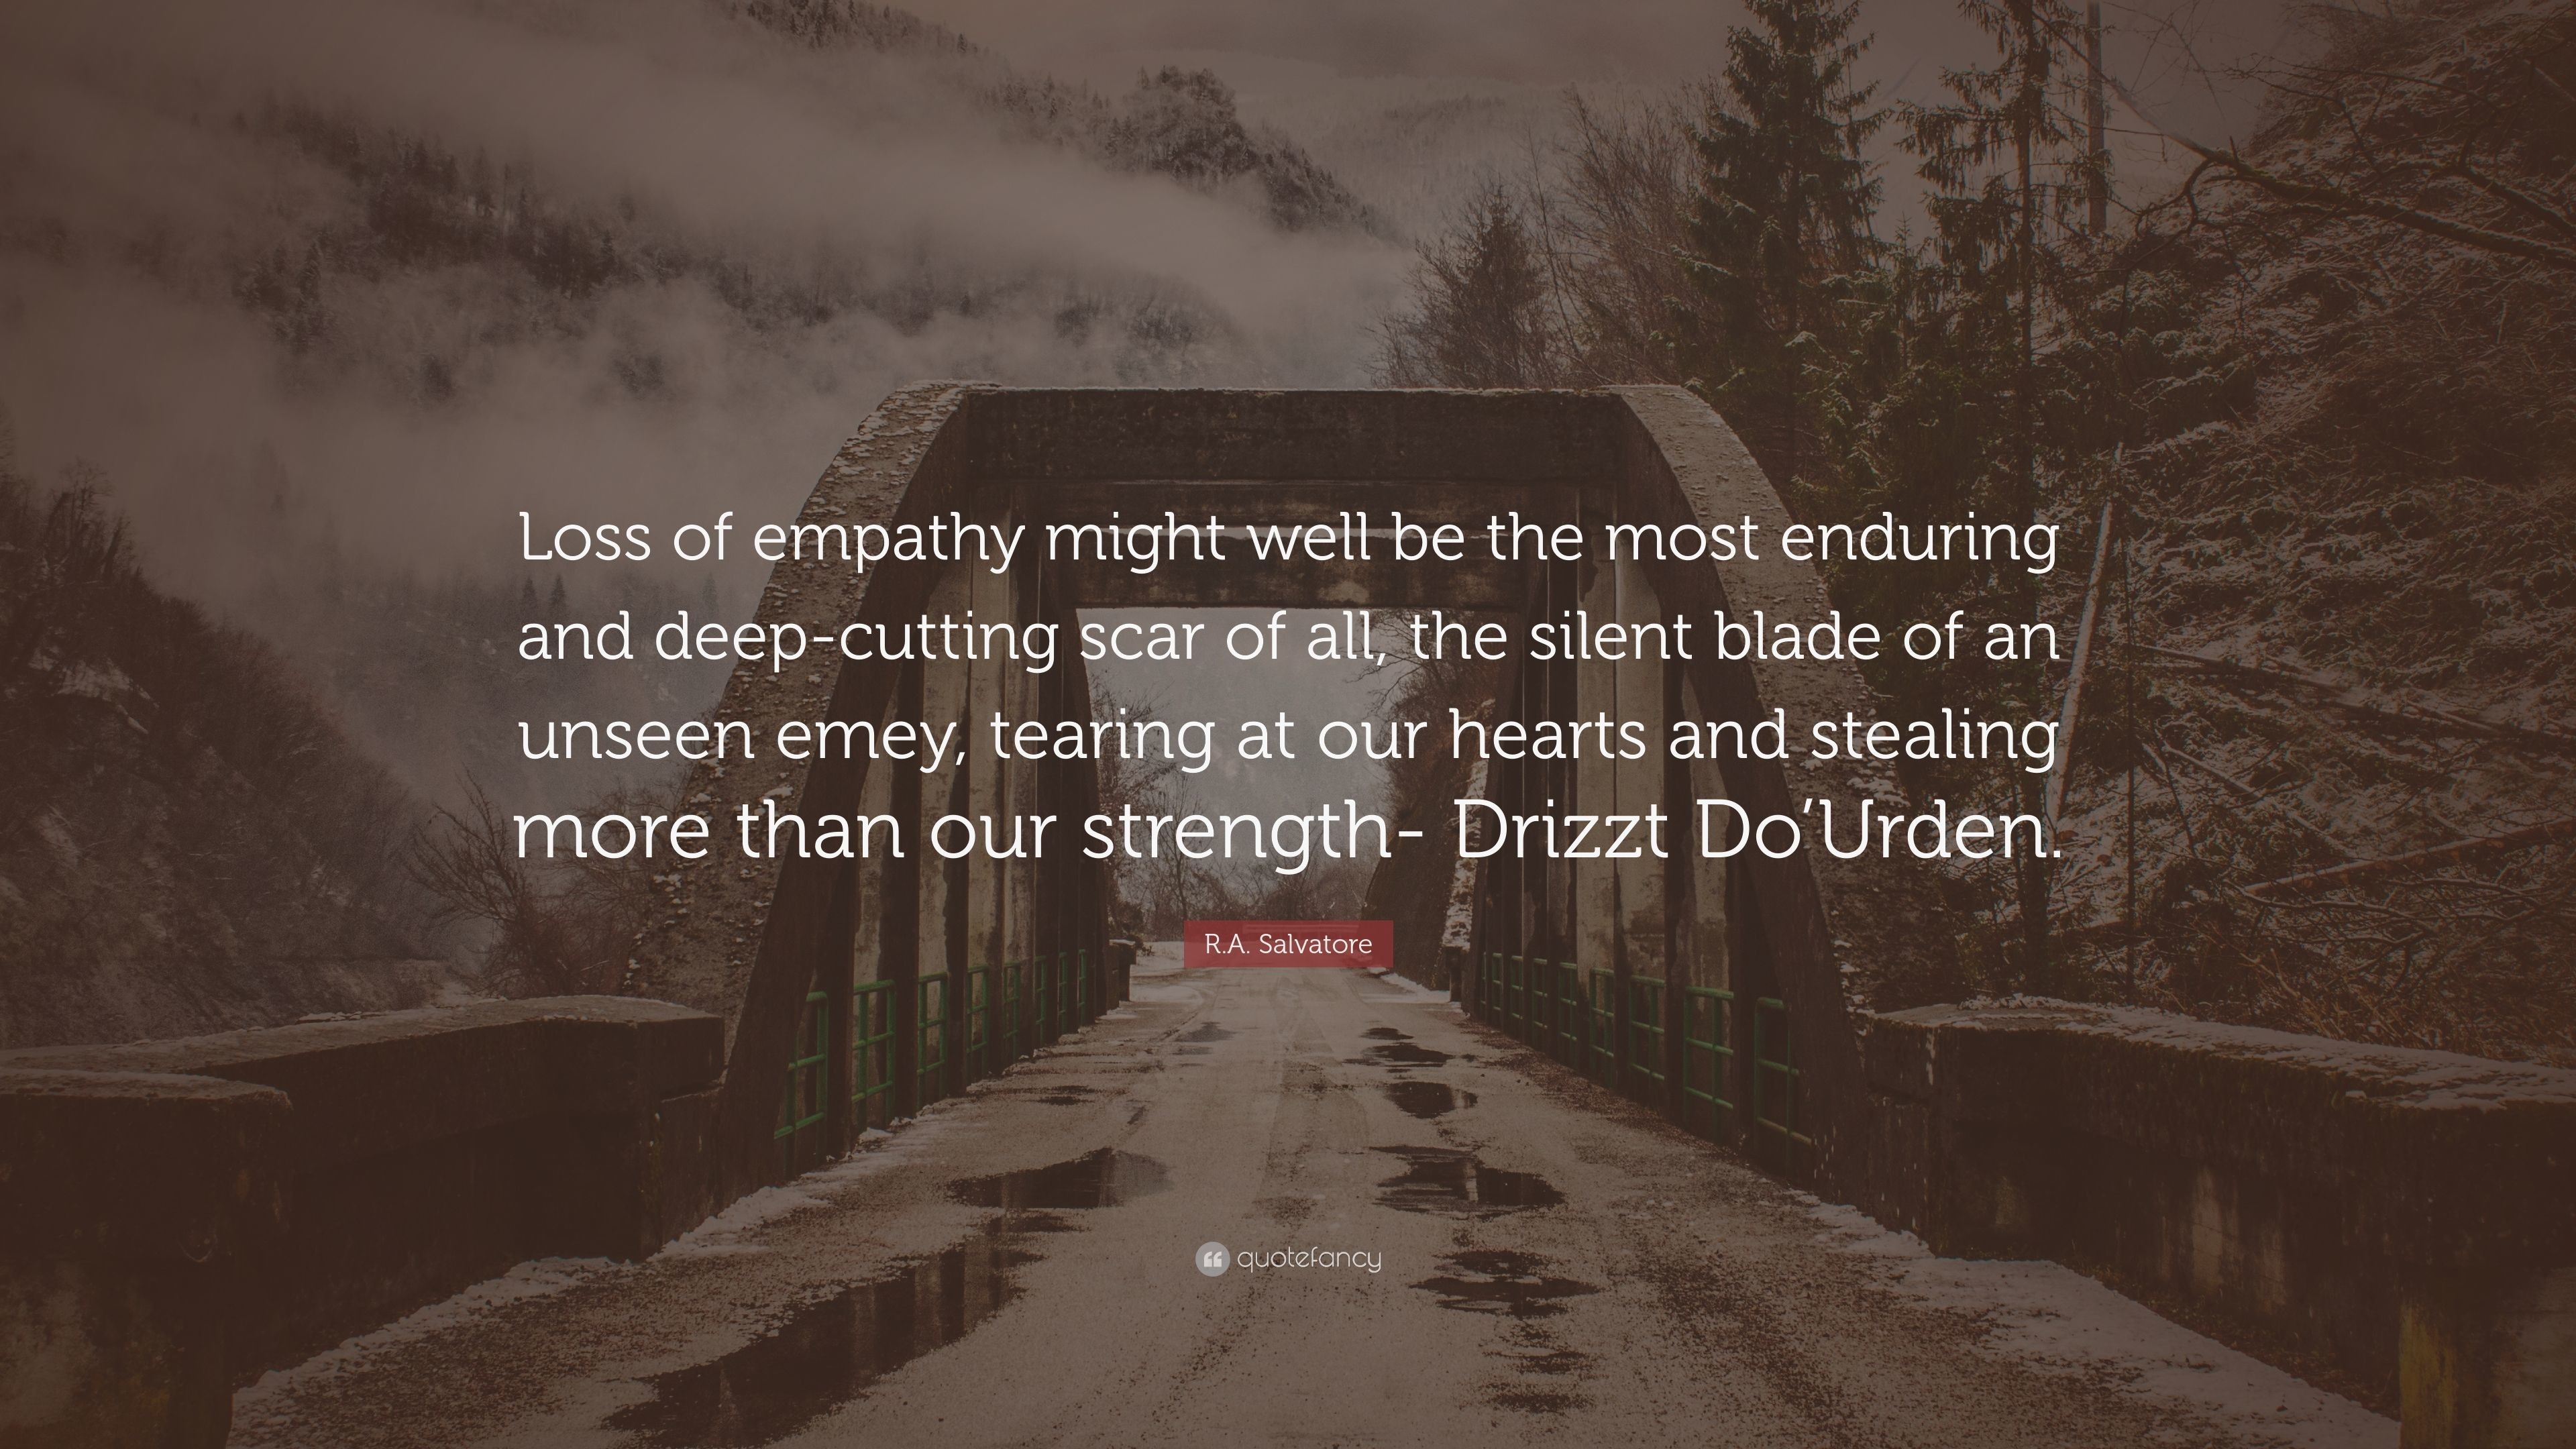 3840x2160 R.A. Salvatore Quote: "Loss of empathy might well be the mos...